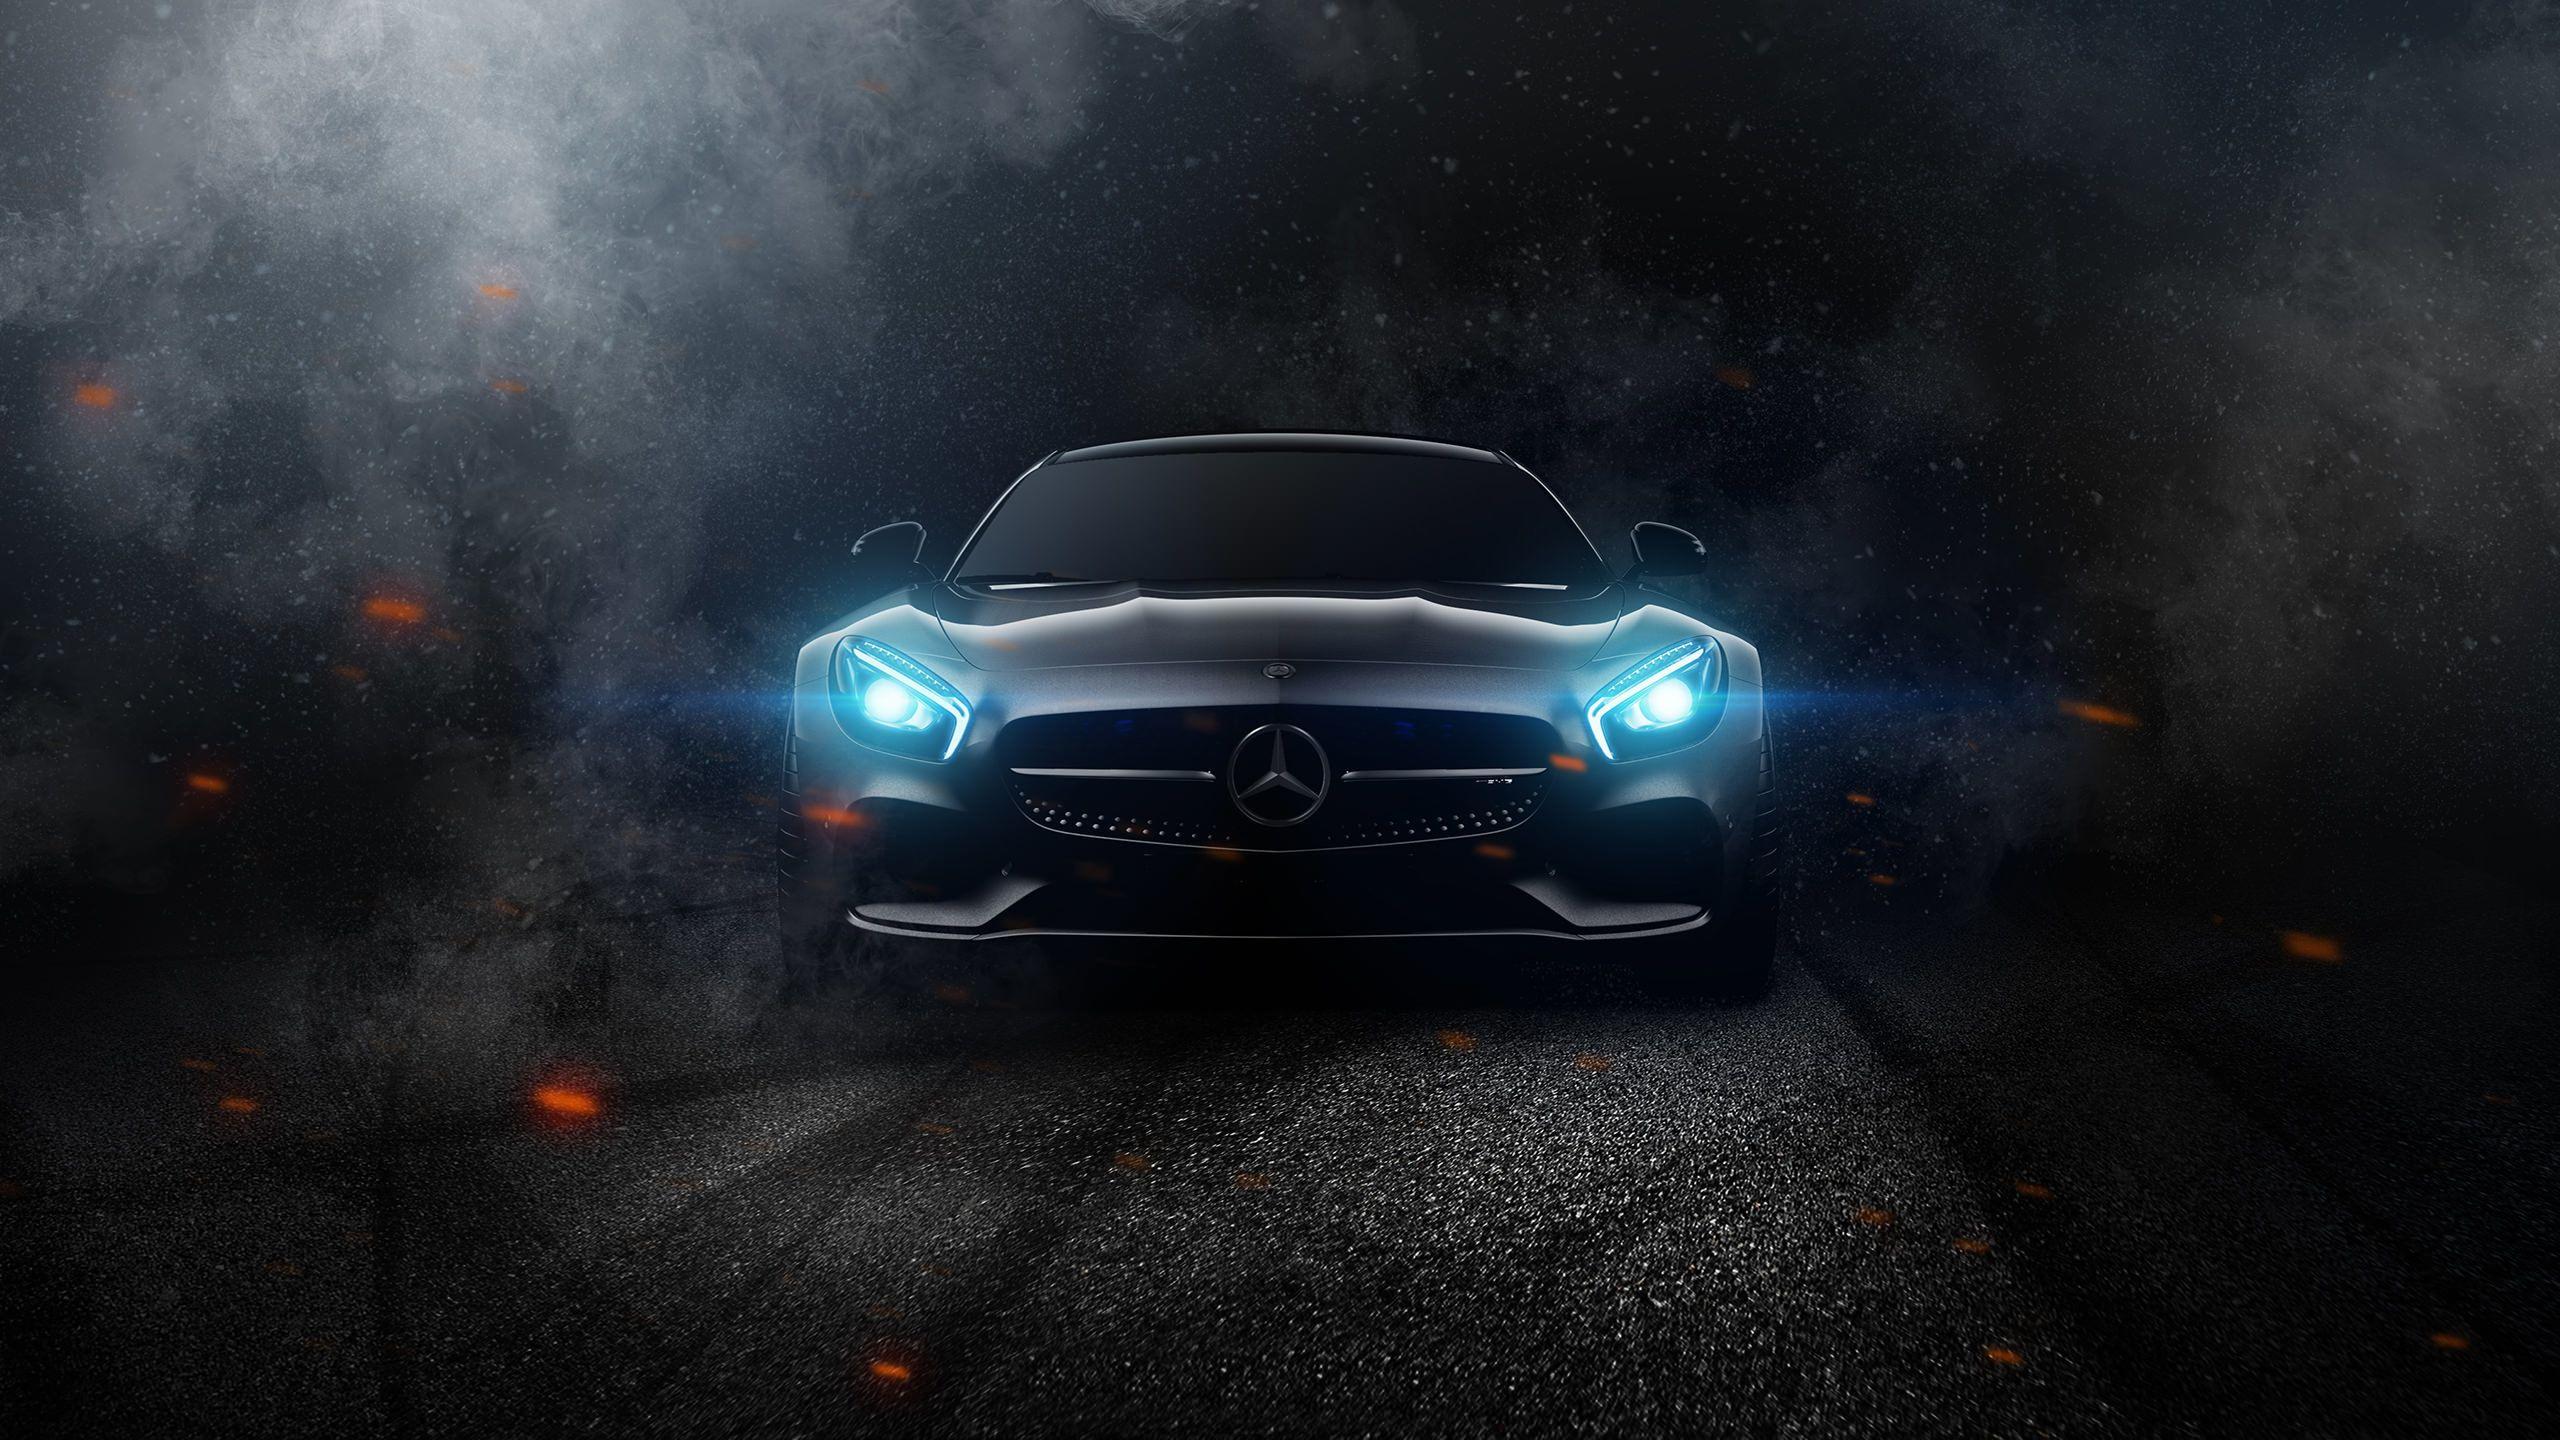 Mercedes Benz Hd Wallpapers For Pc Brekele Wall